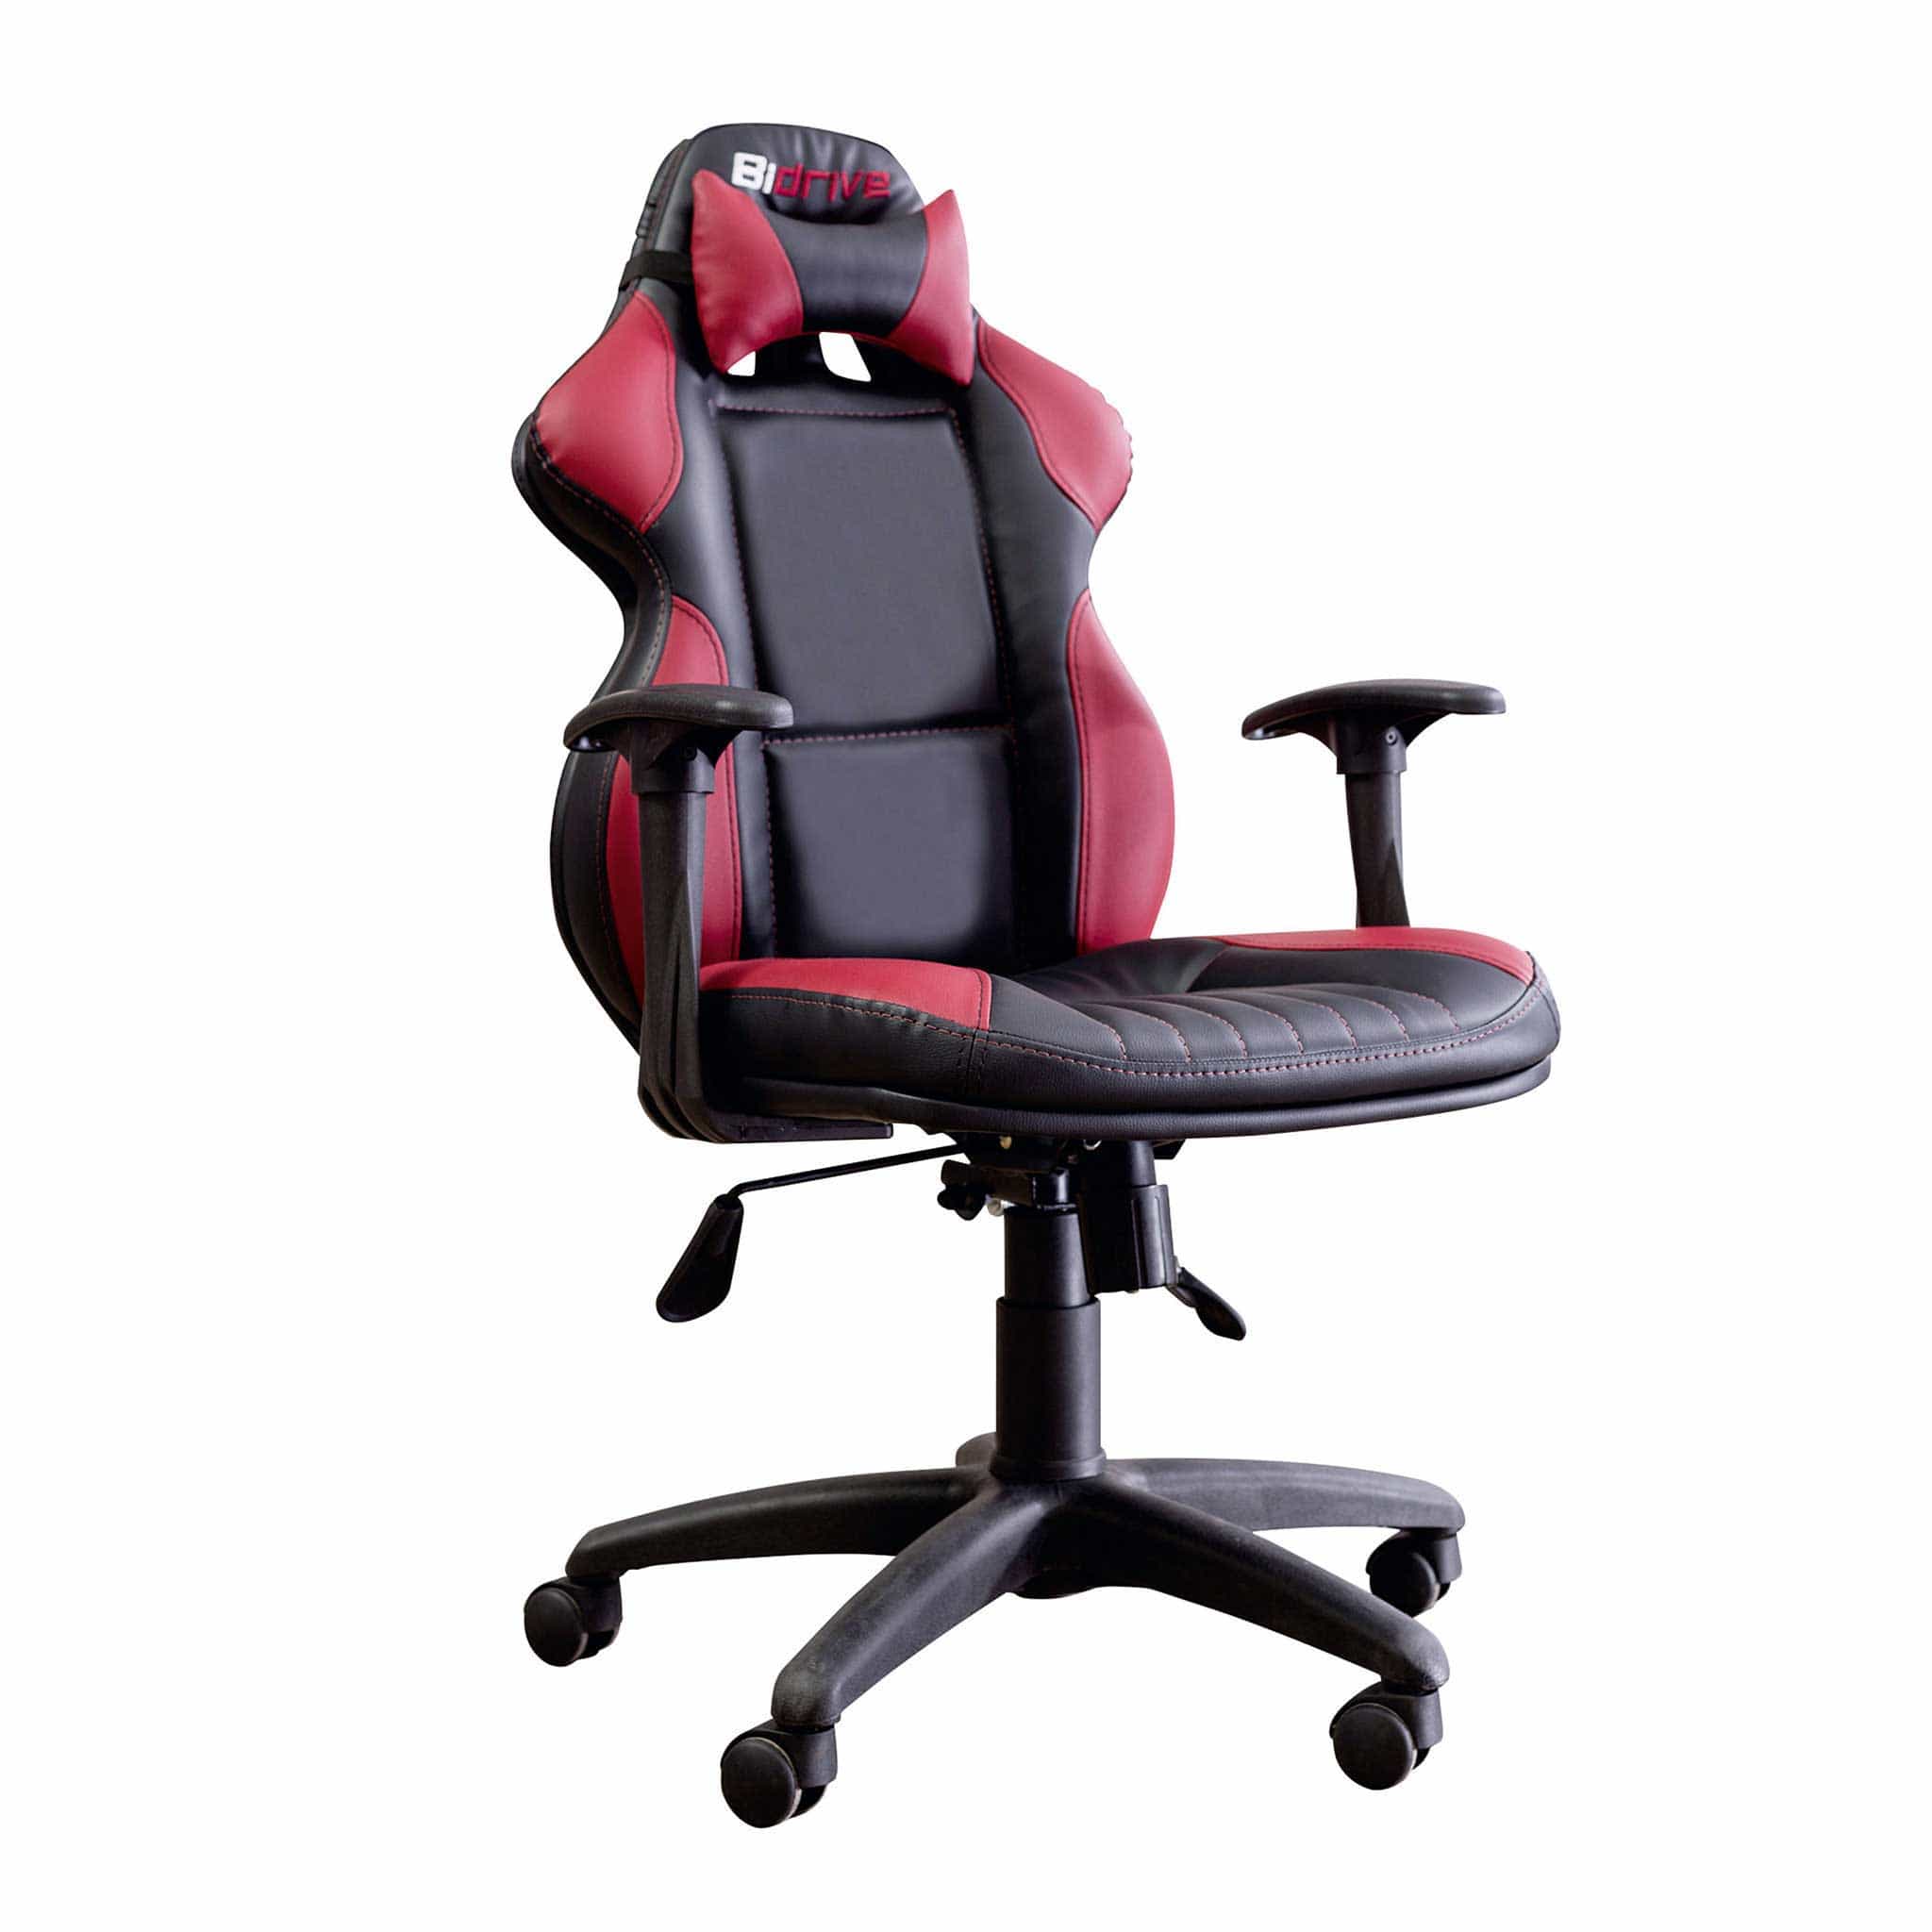 GTS Ergonomic Swivel Gaming Chair with Armrests